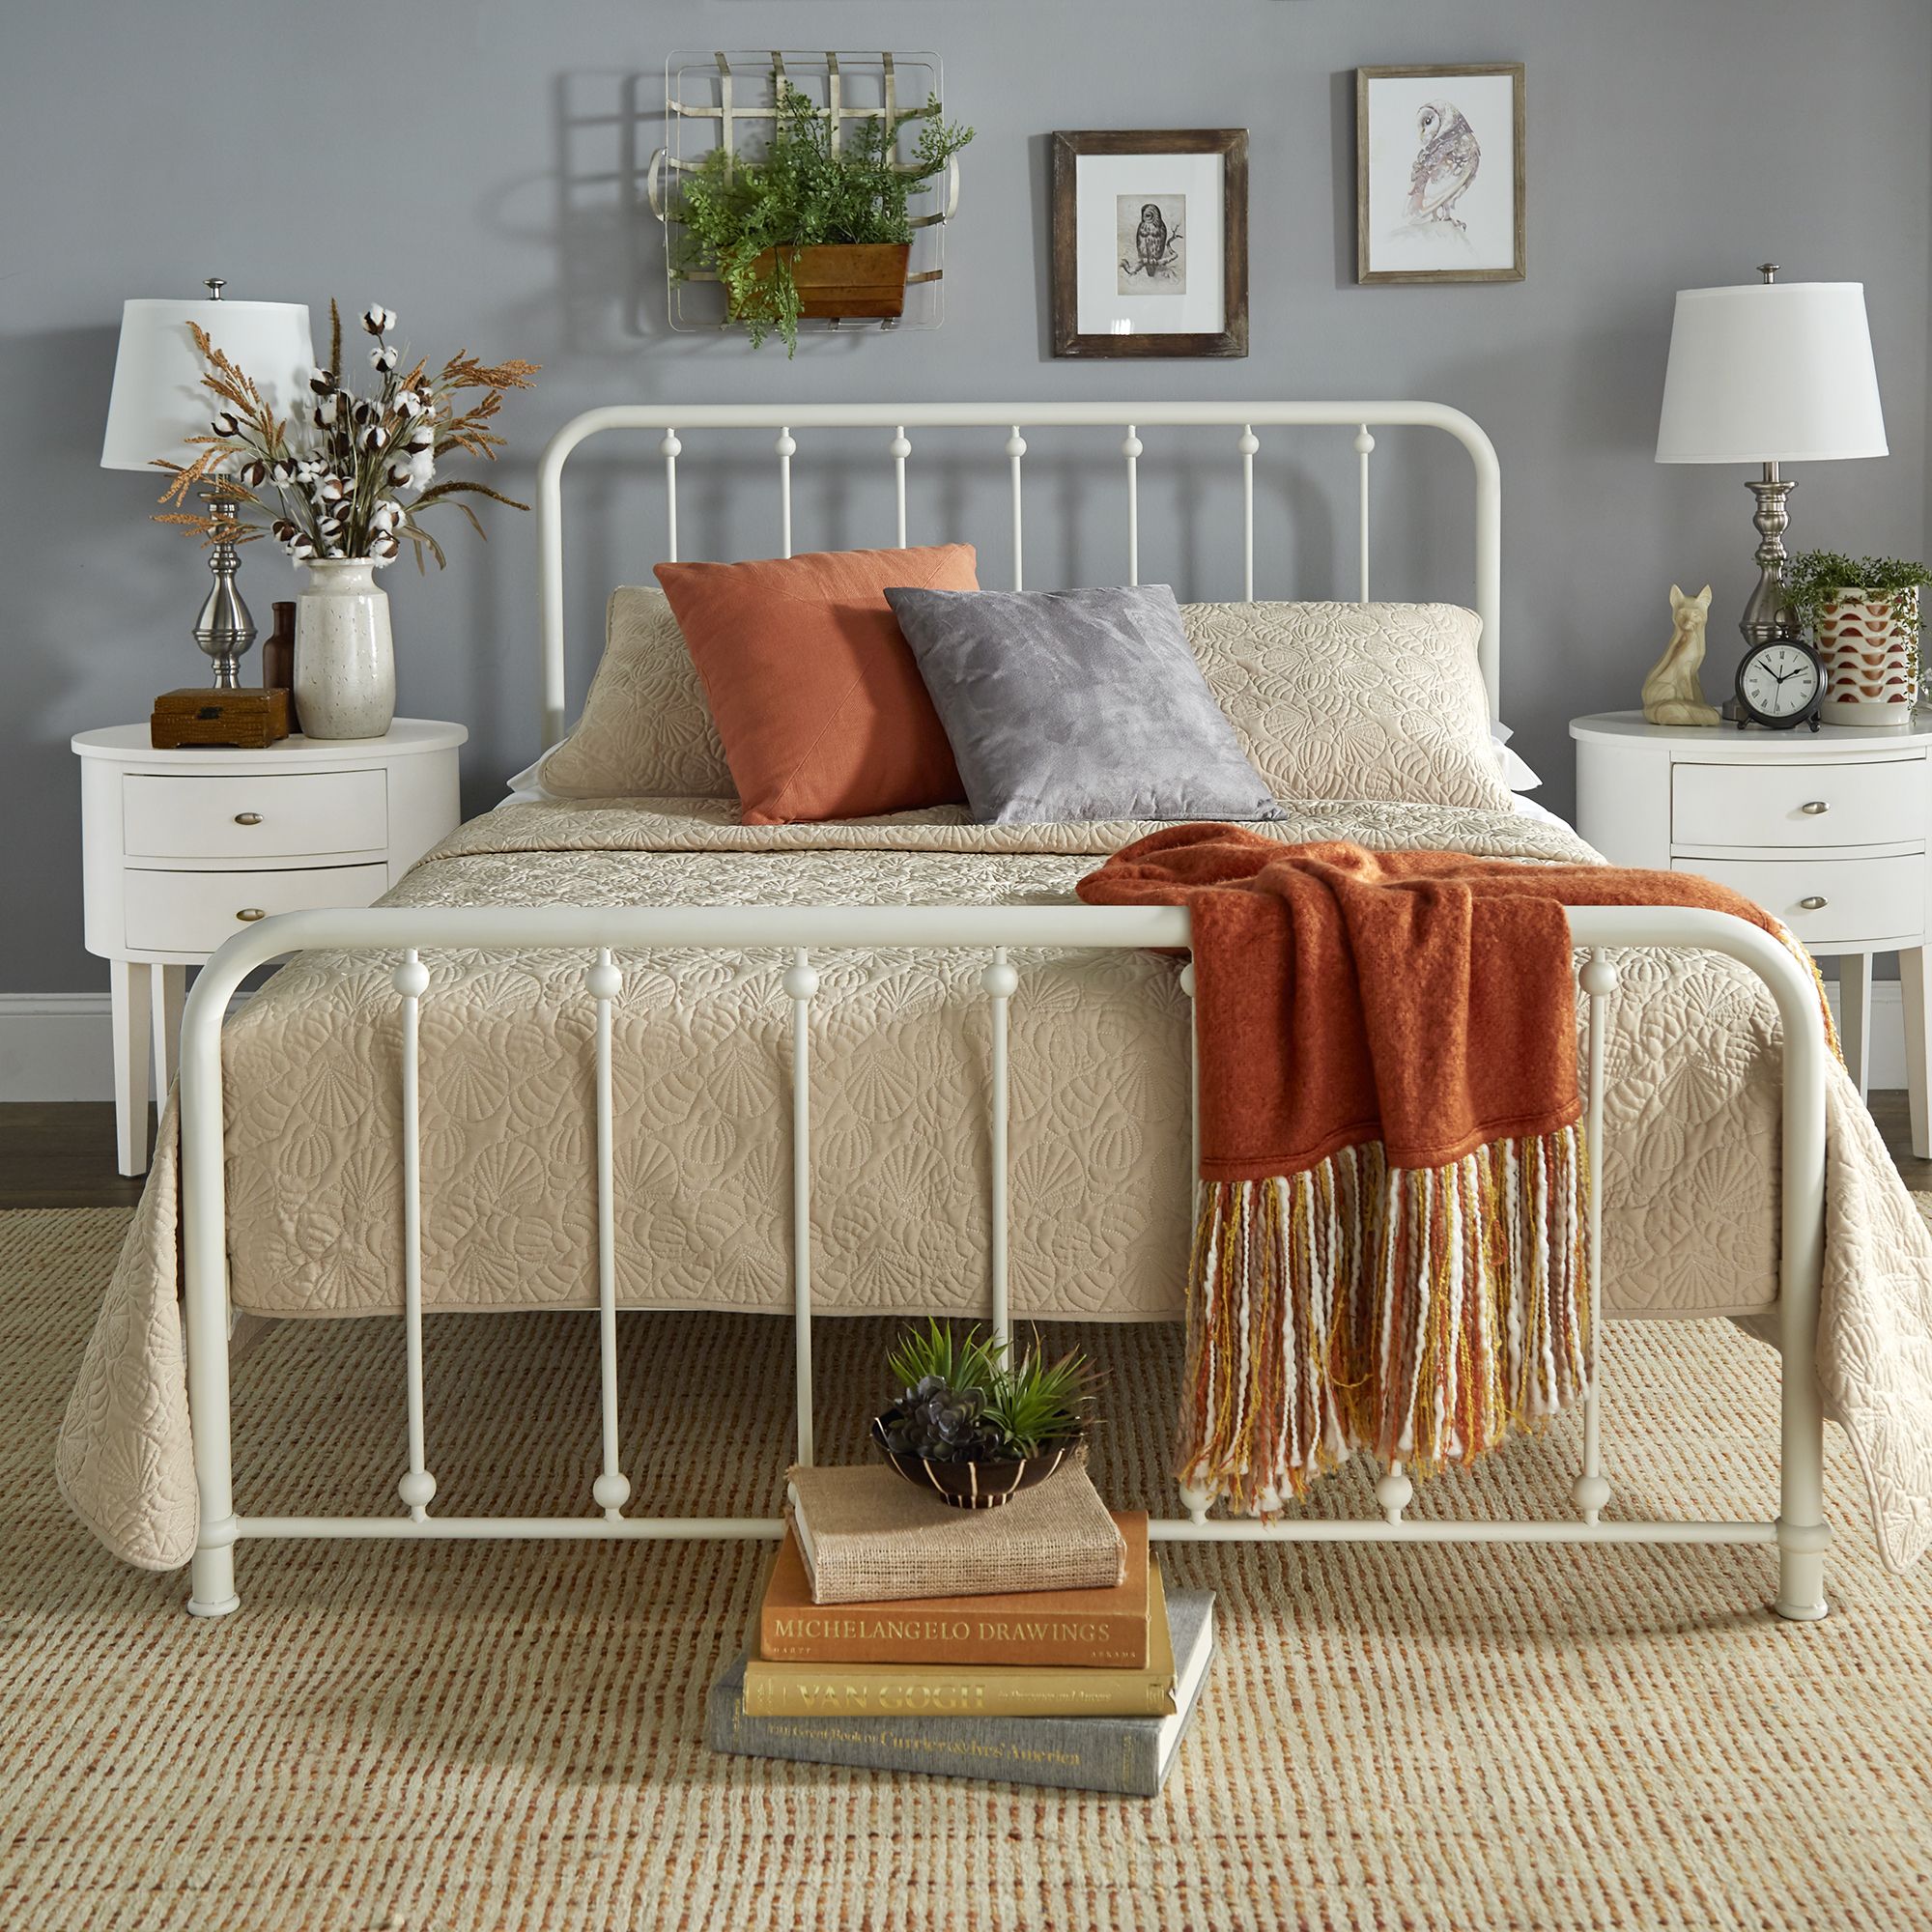 The Ultimate Romantic Decor for Creating a Vintage-Chic Bedroom